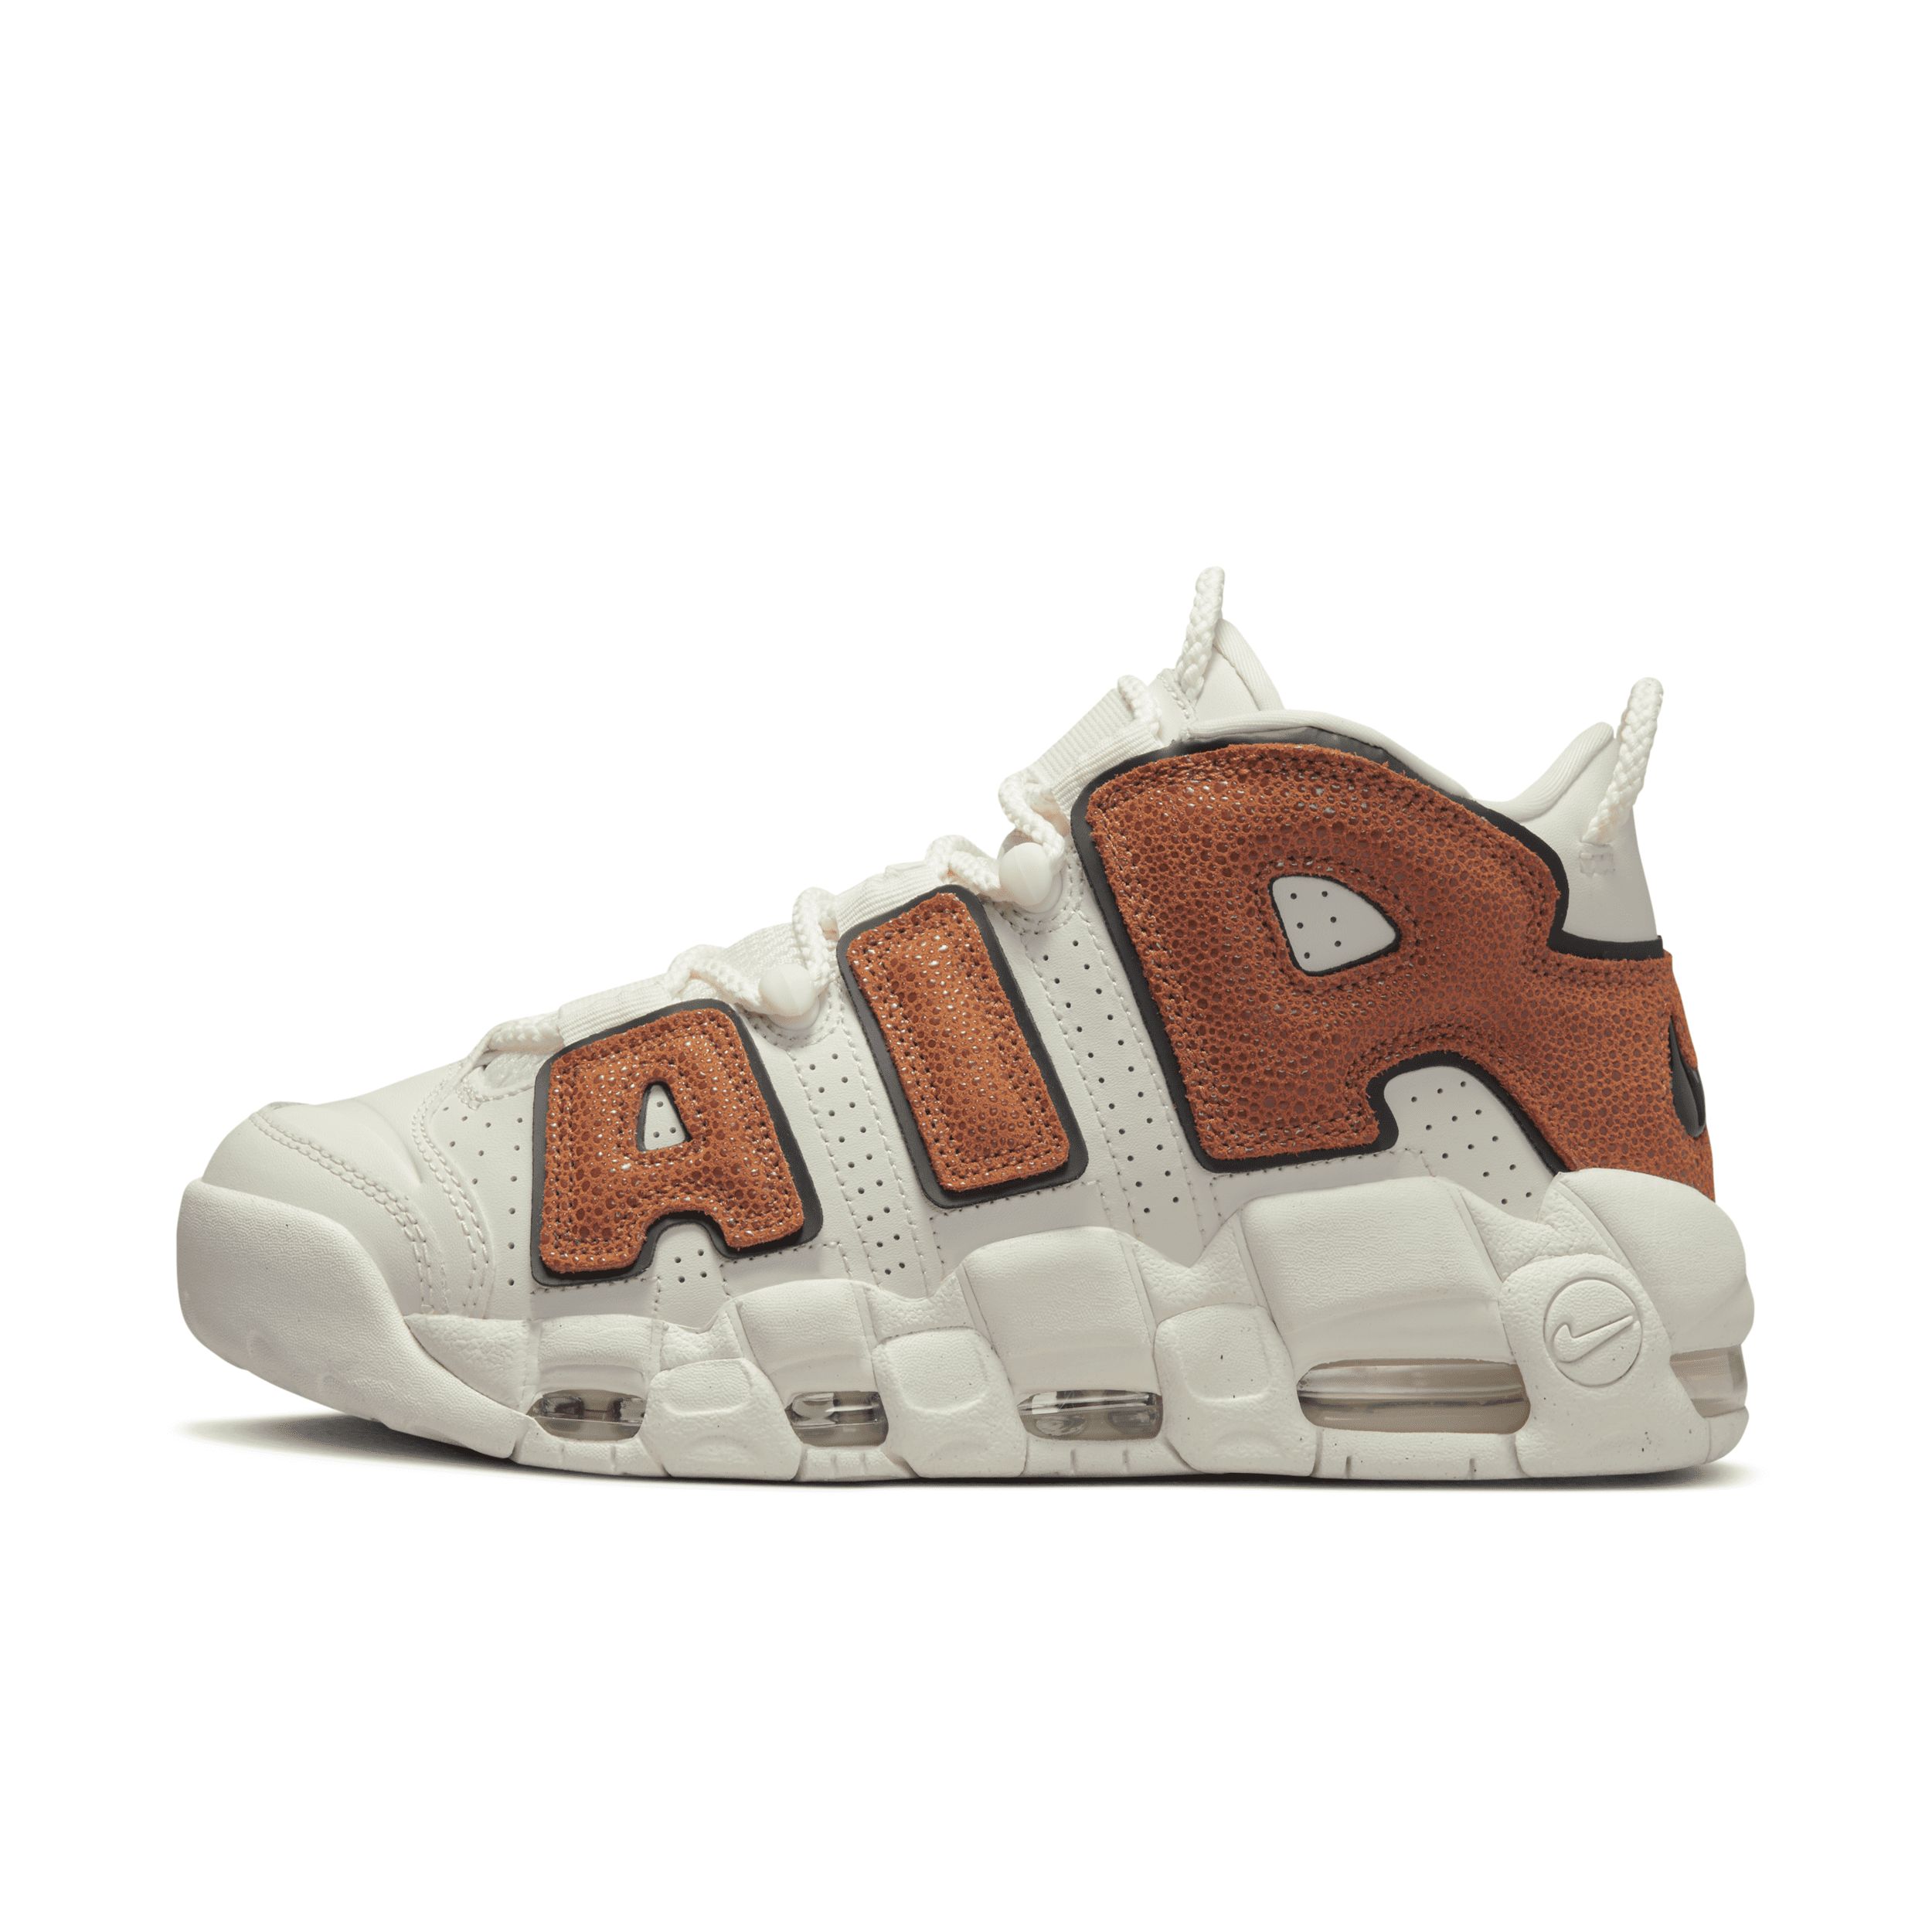 Nike Women's Air More Uptempo Shoes in Grey, Size: 12 | DZ5227-001 | Nike (US)